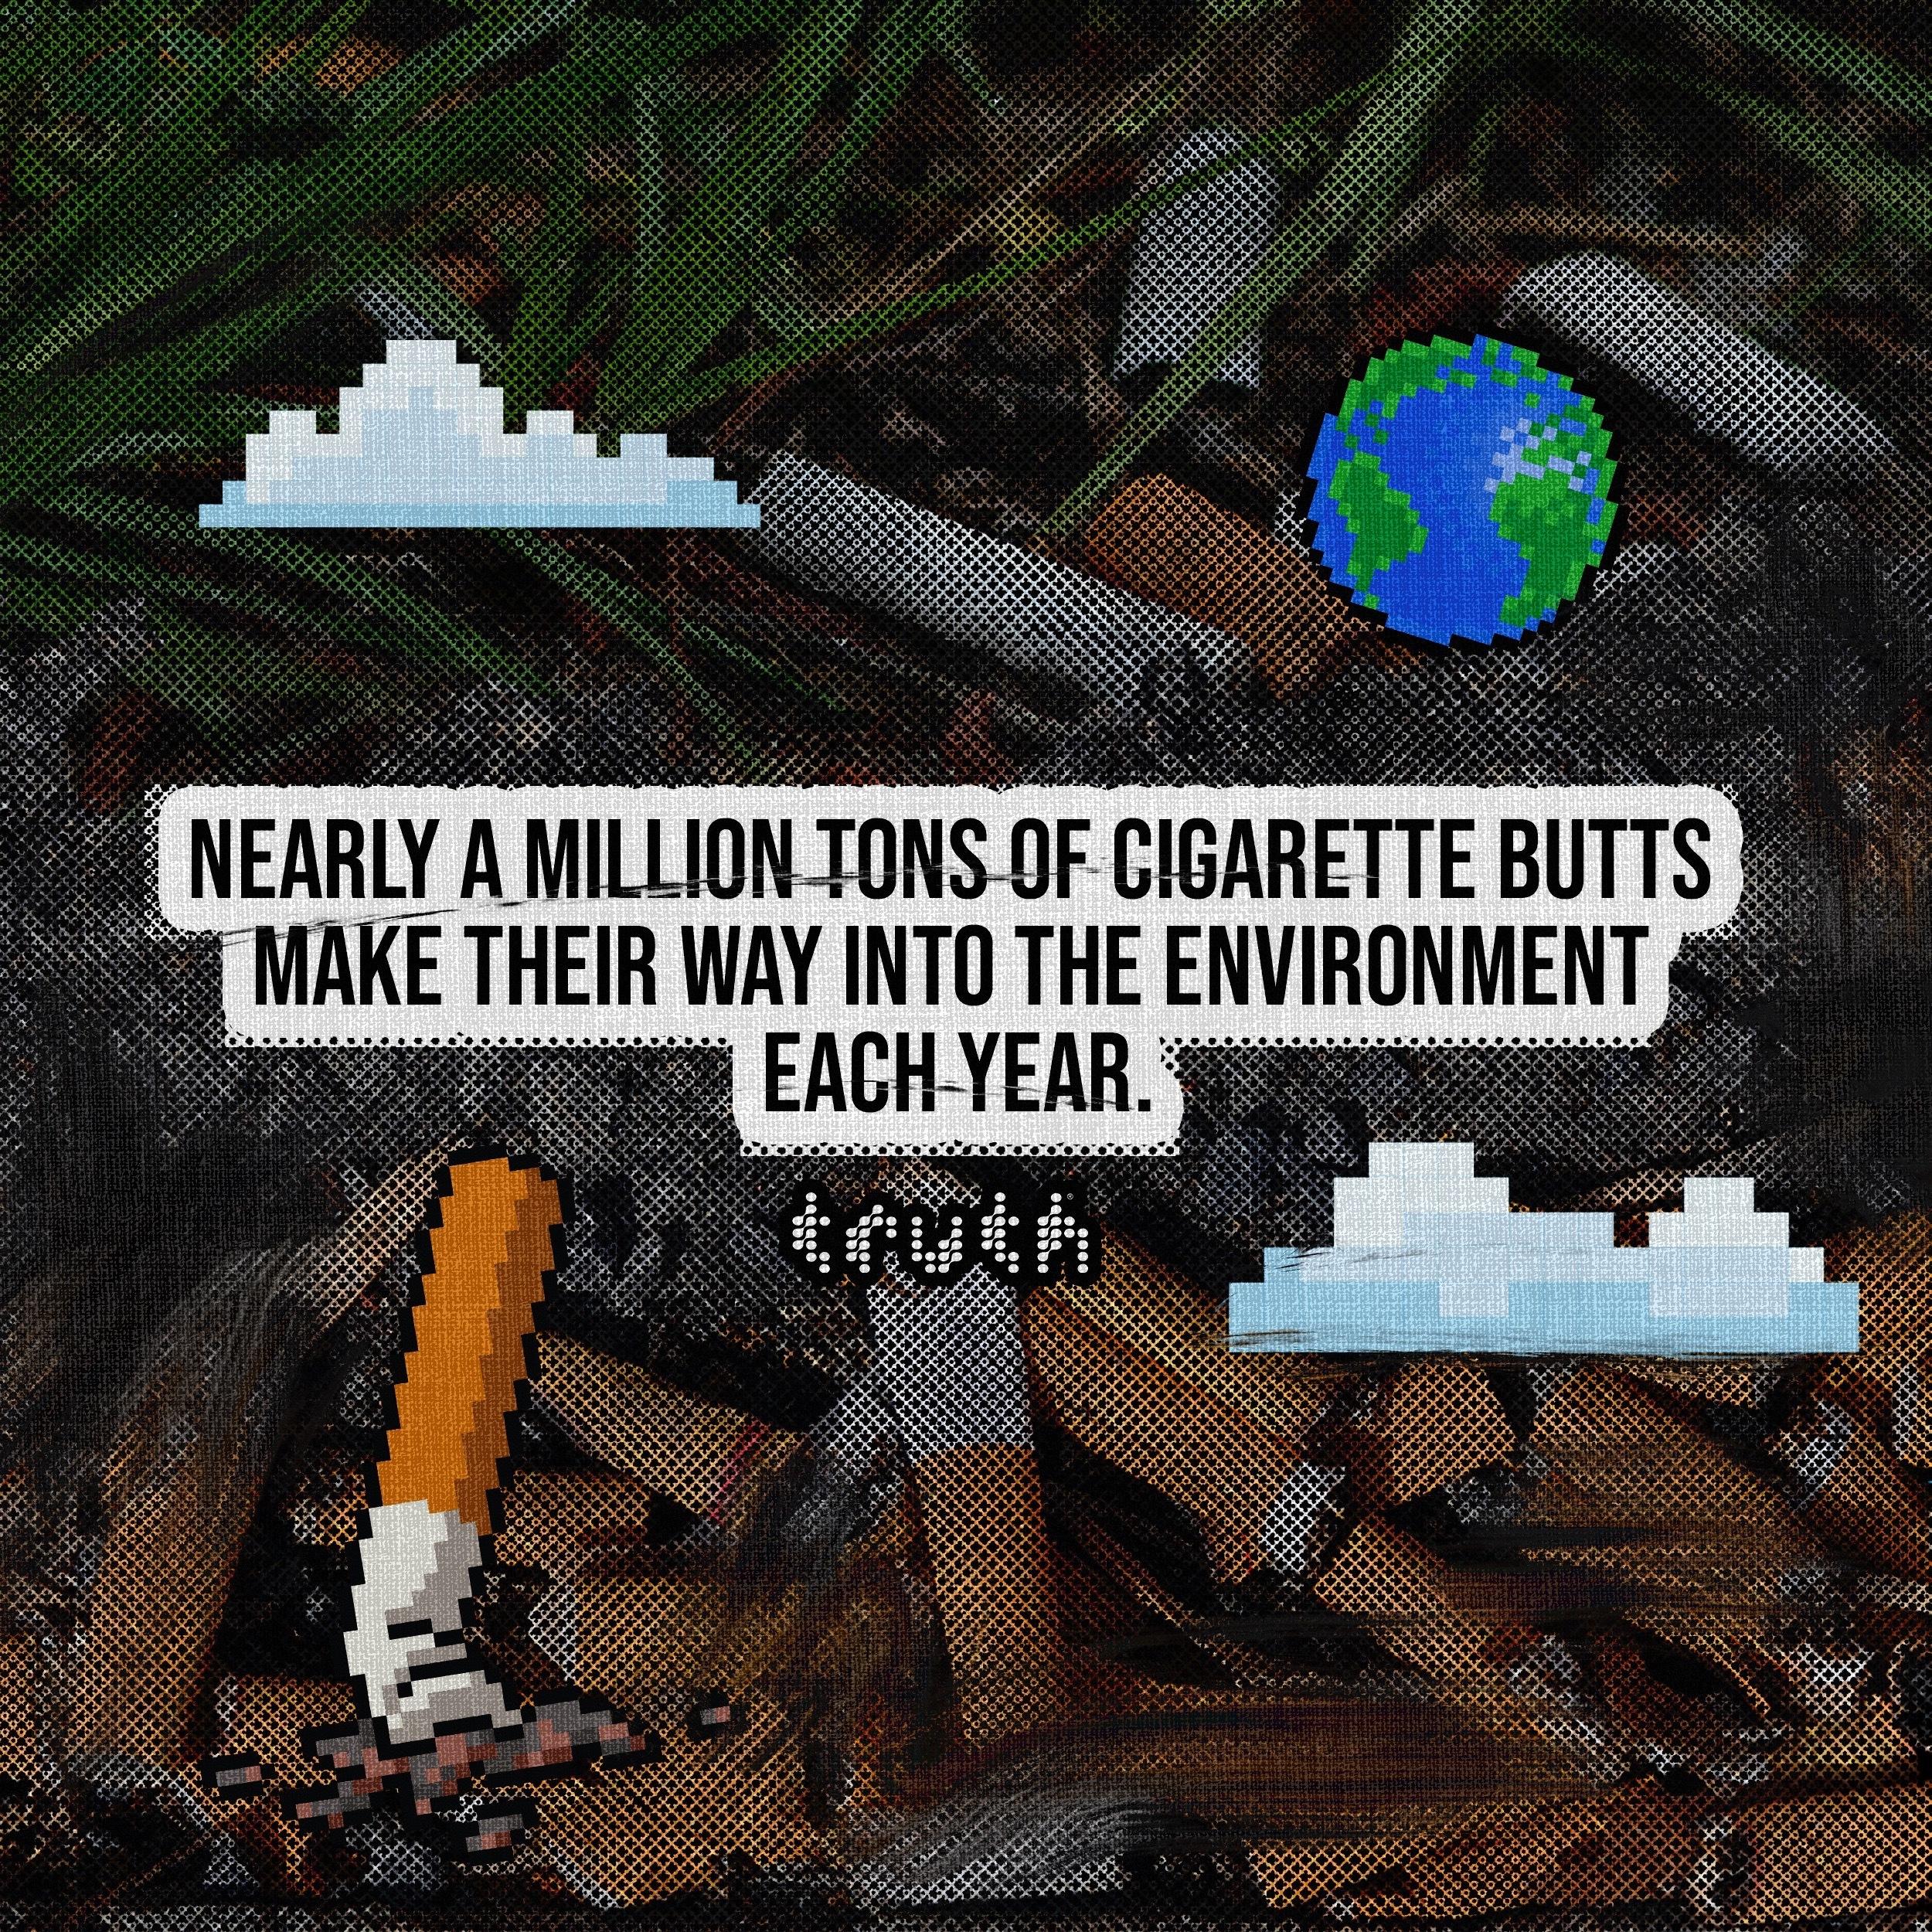 Nearly a million tons of cigarette butts make their way into the environment each year.